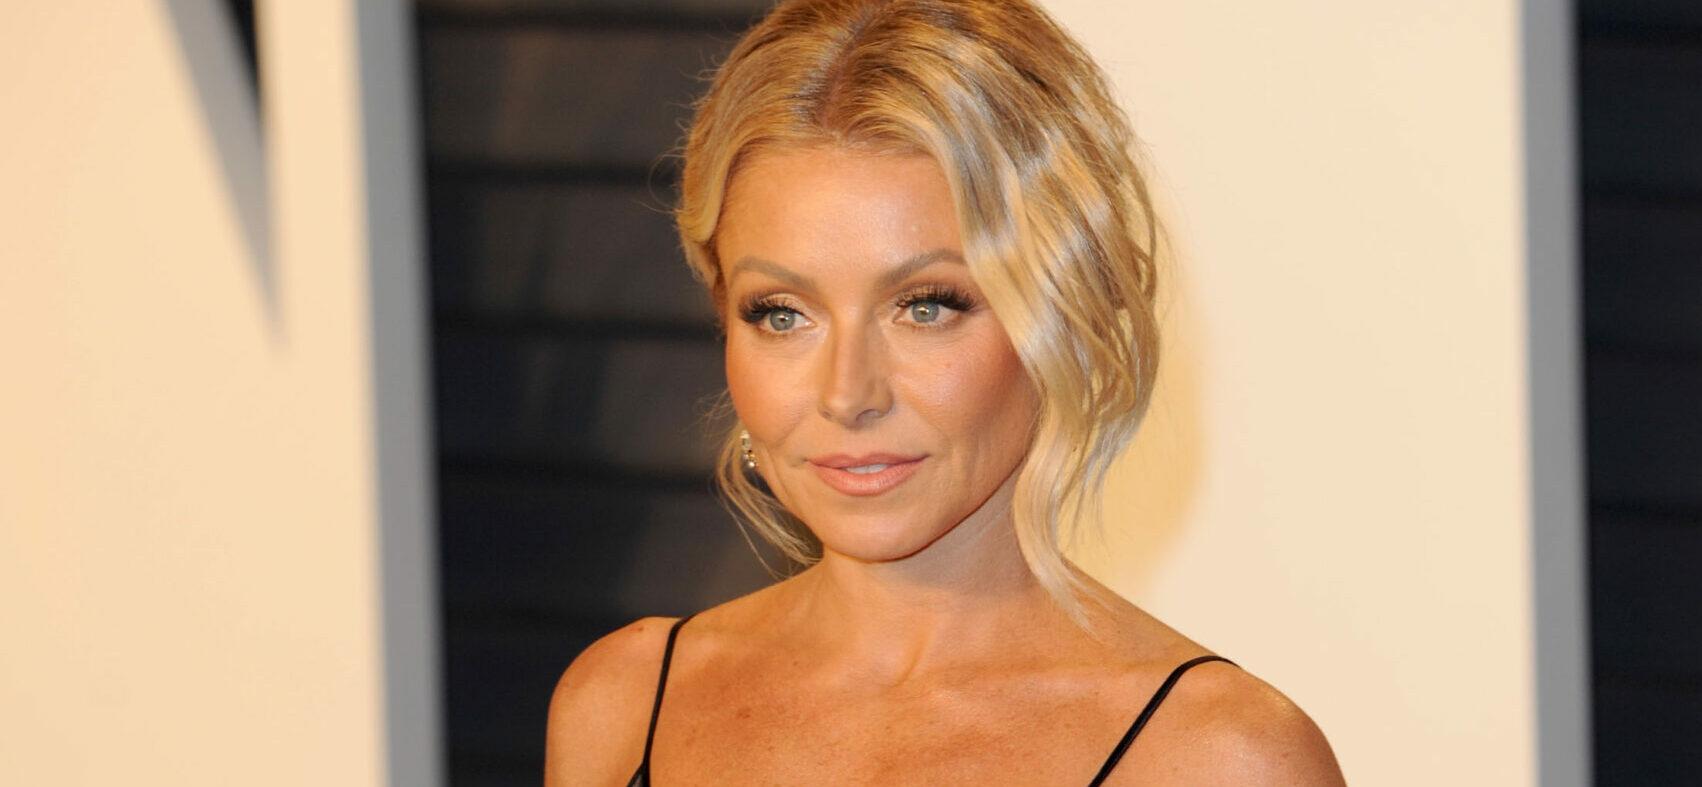 Kelly Ripa Talks Pearl Necklaces And Mustard Baths With Ryan Seacrest on ‘LIVE’